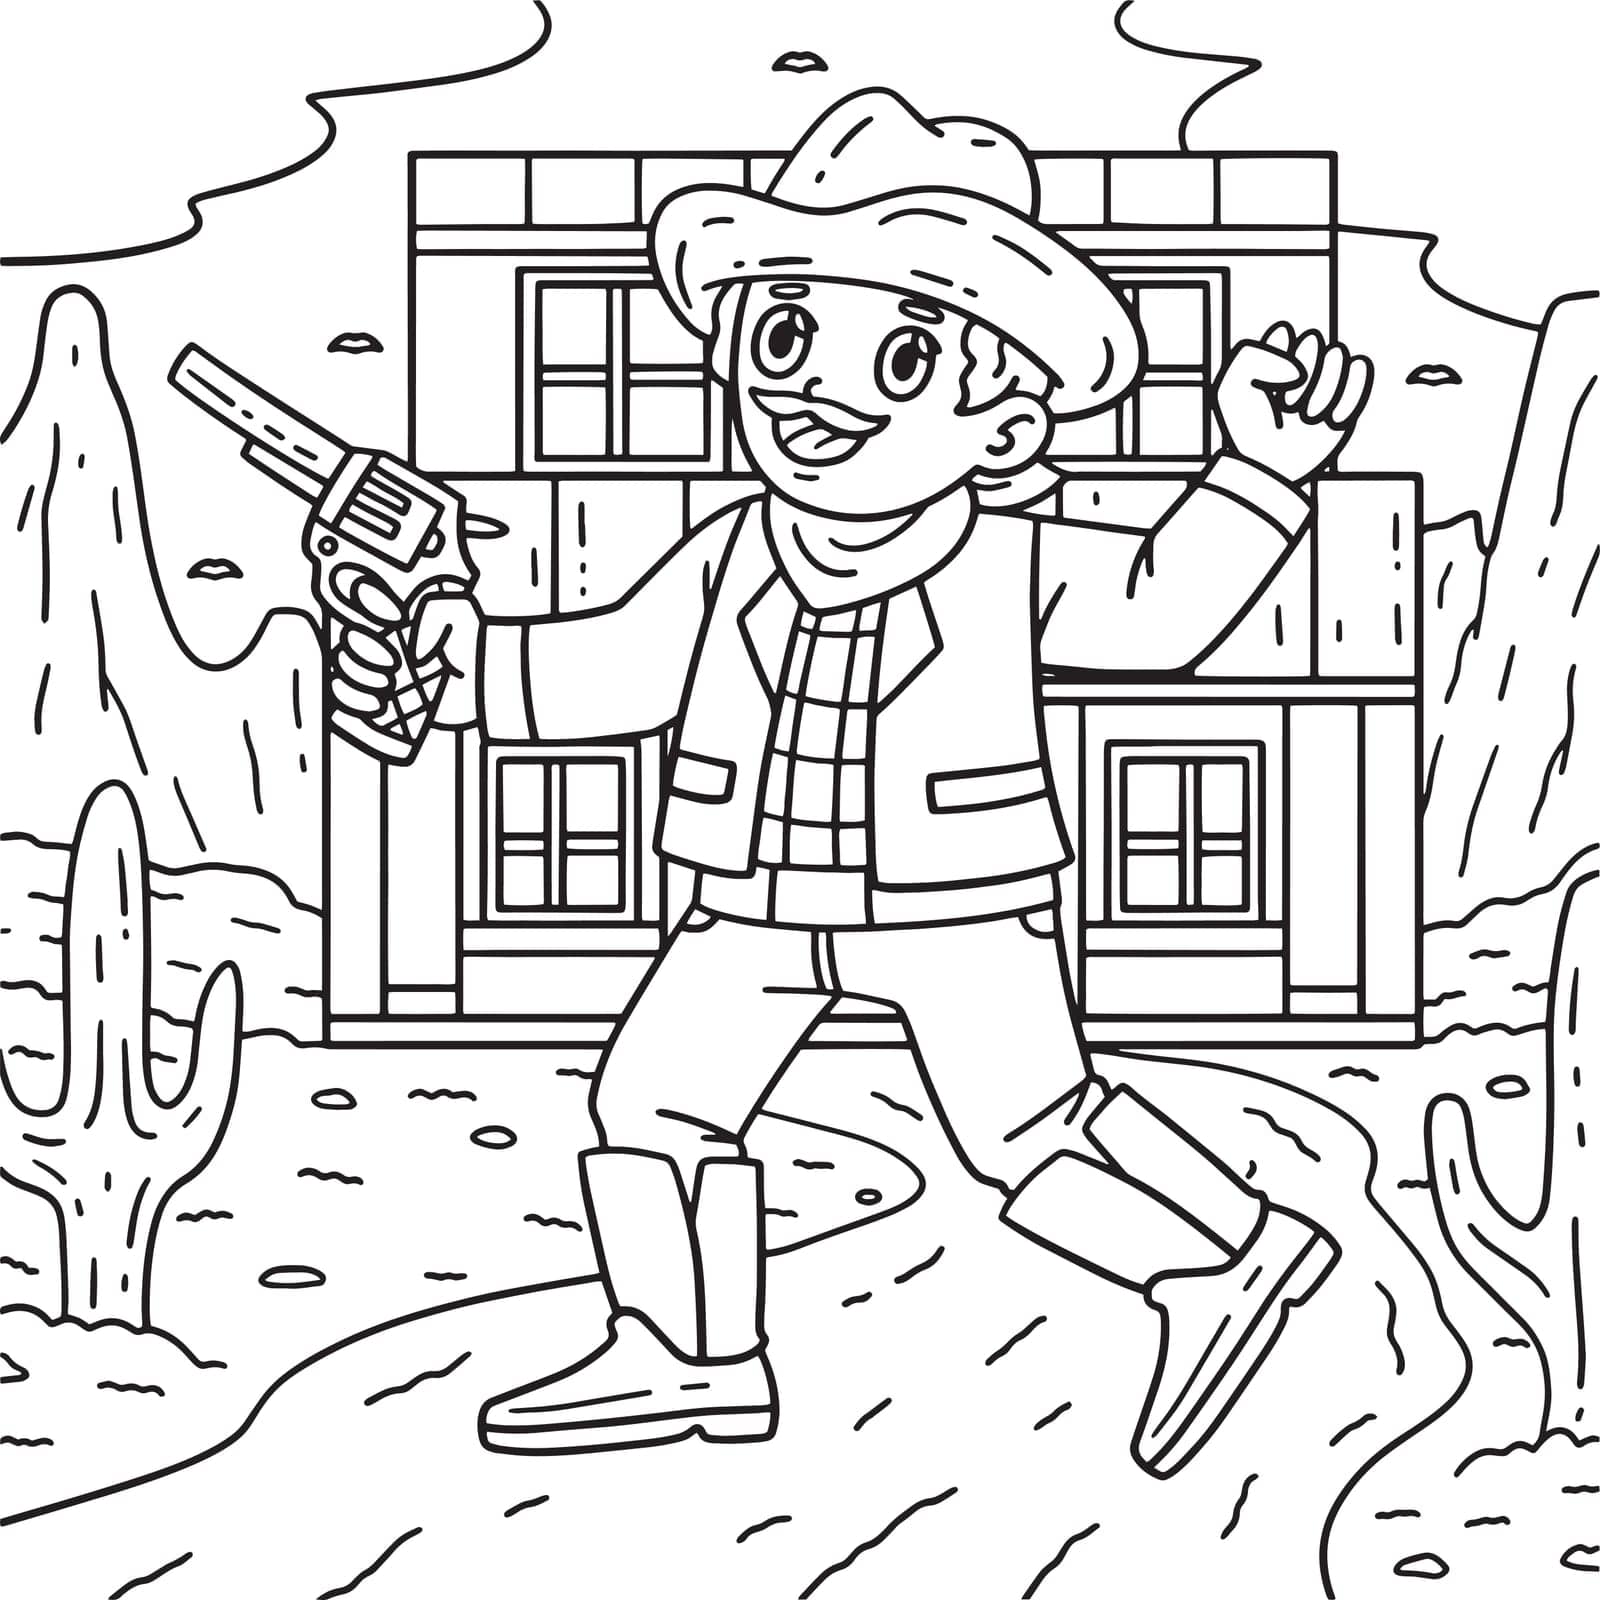 A cute and funny coloring page of a Cowboy with Gun. Provides hours of coloring fun for children. To color, this page is very easy. Suitable for little kids and toddlers.